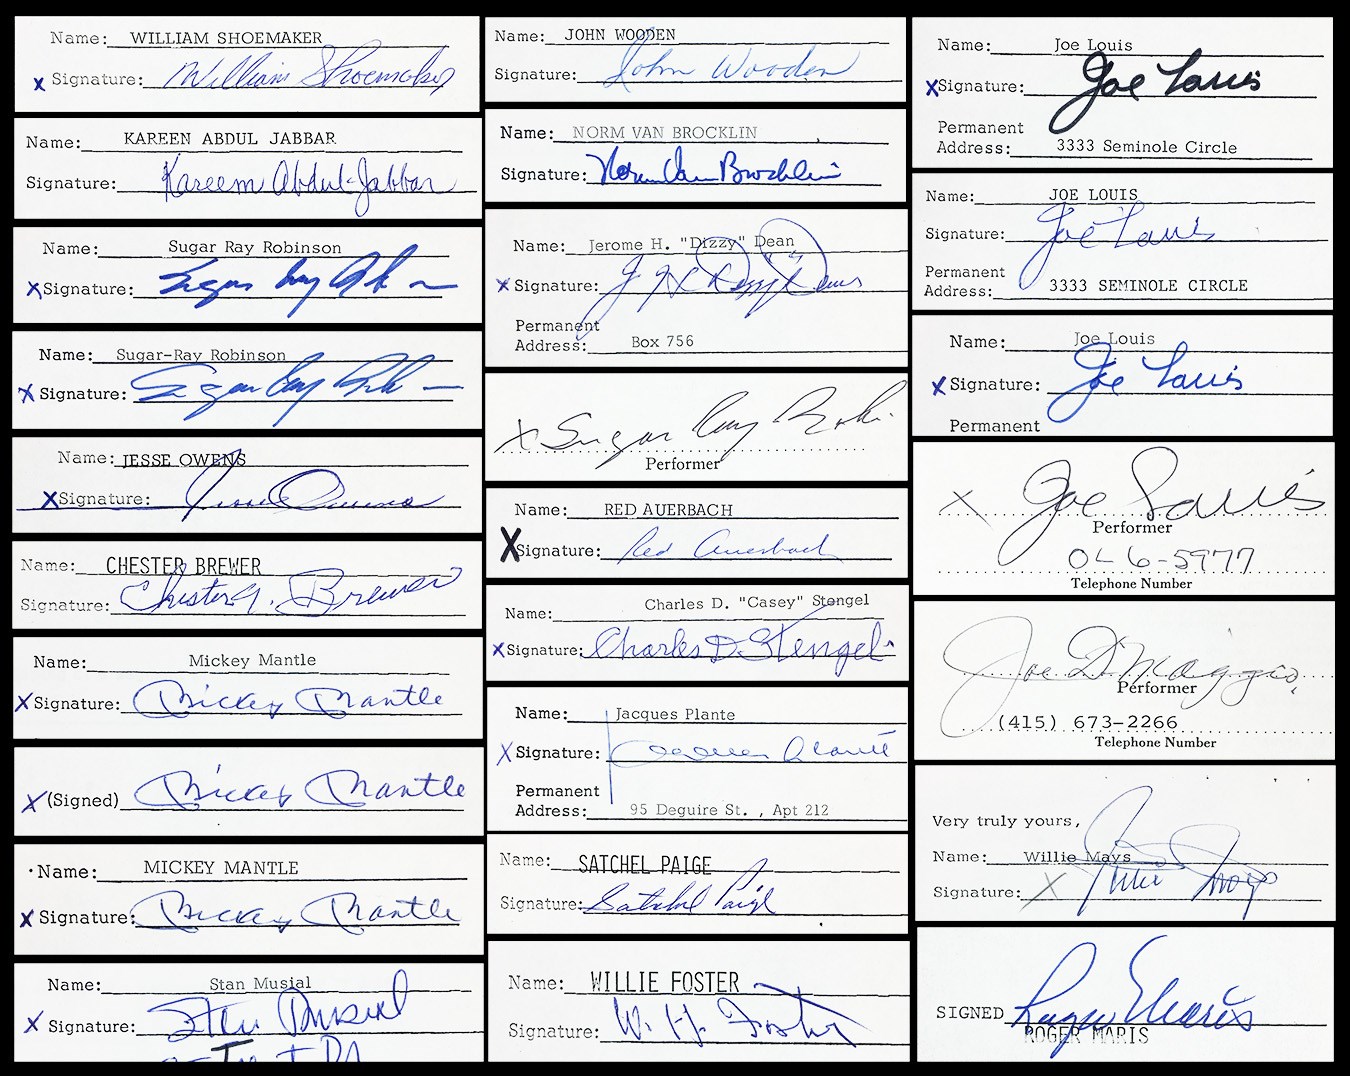 Baseball Autographs - Amazing 1970s Sports Game Show Signed Contract Archive Directly from the Family - (2) Bill Foster, (3) Mantle, (4) Louis, (3) Ray Robinson (225+)